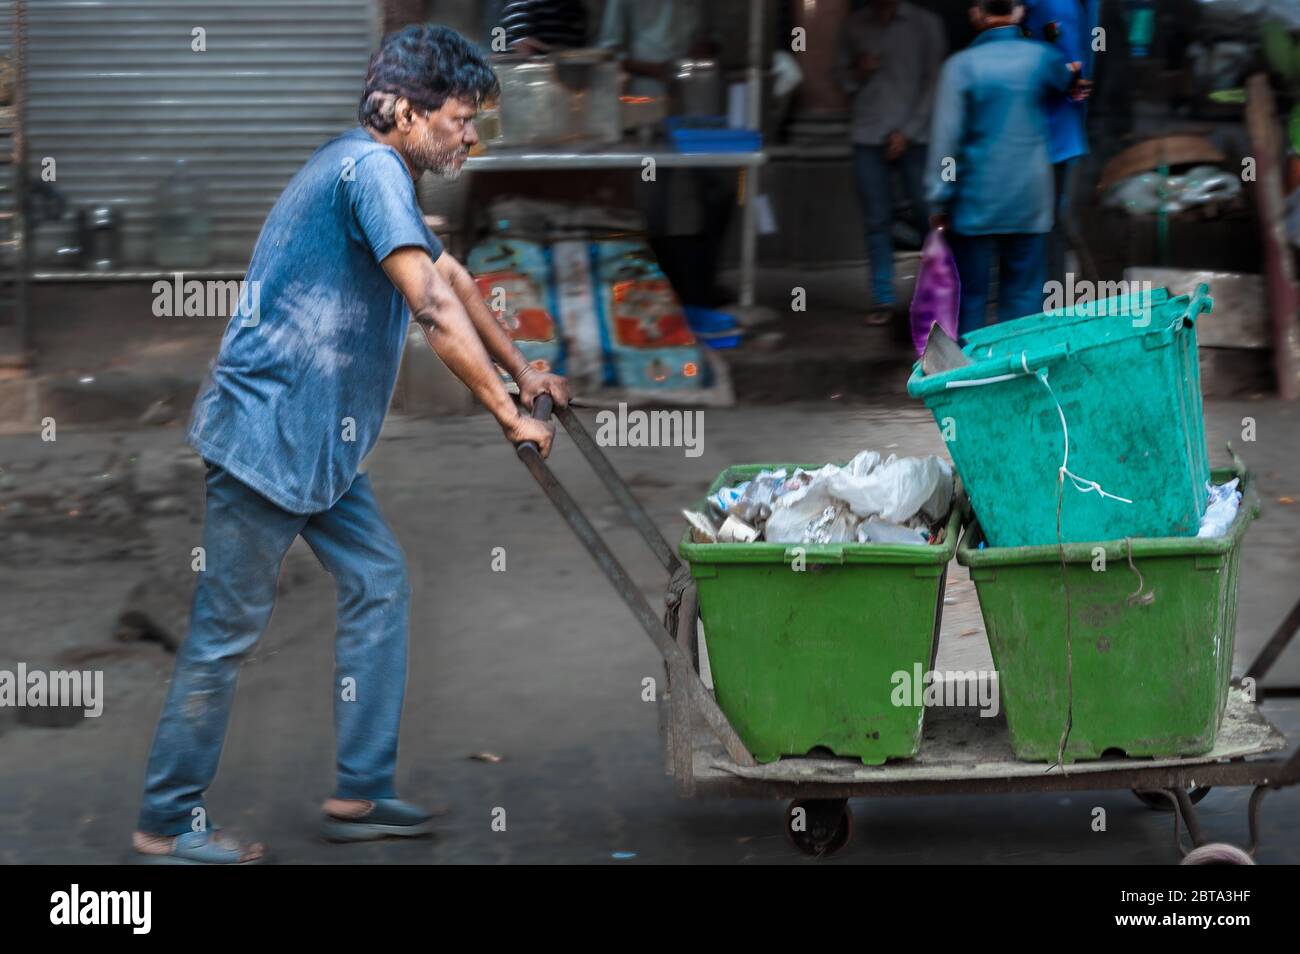 Young Indian pushes an old cart with buckets of rubbish in front of him in a poor area of Mumbay Stock Photo